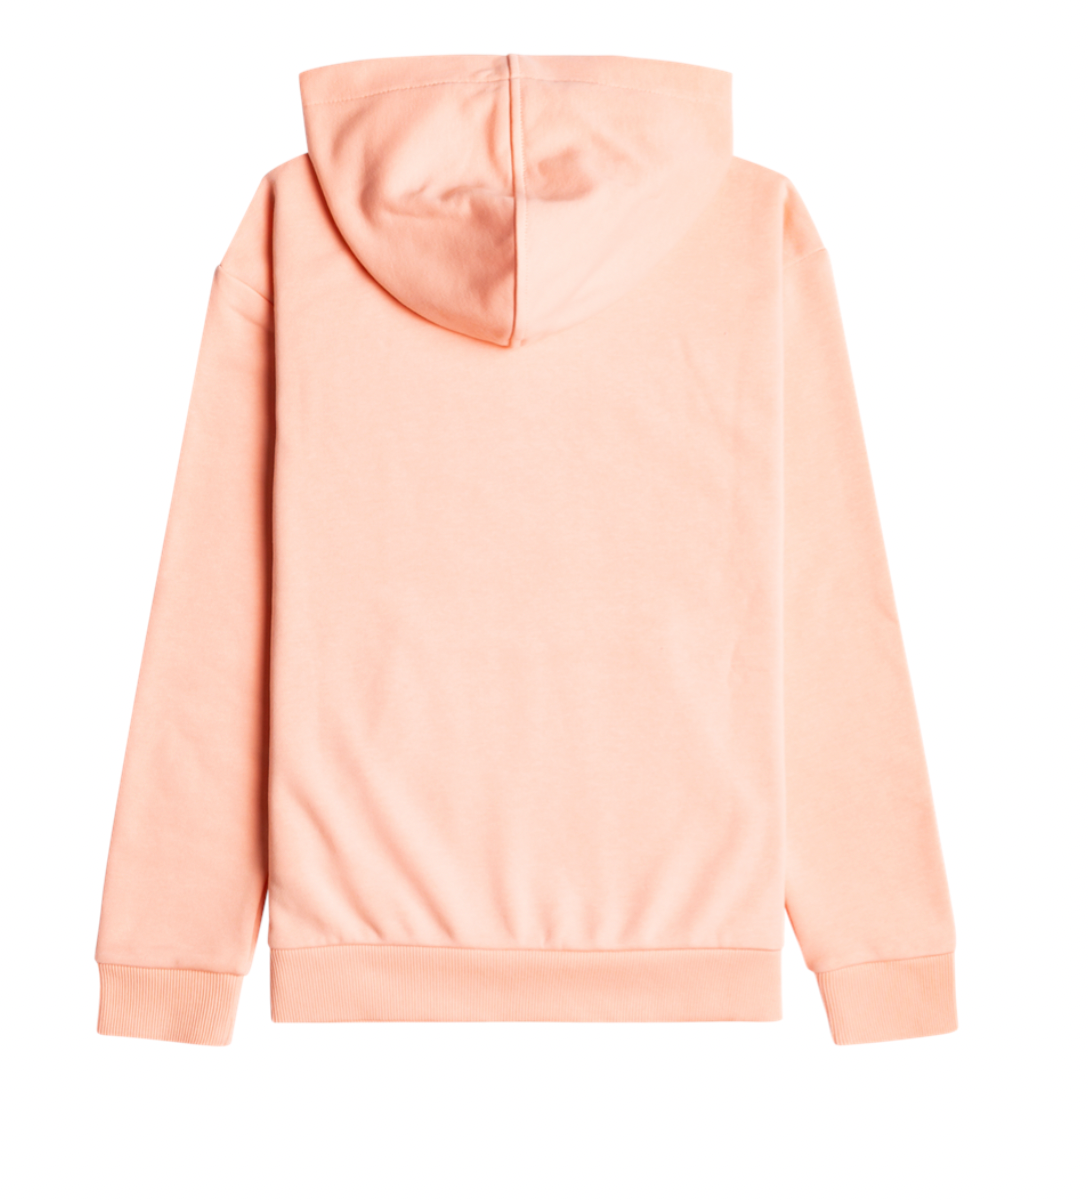 ROXY GIRLS HAPPINESS FOREVER A HOODY